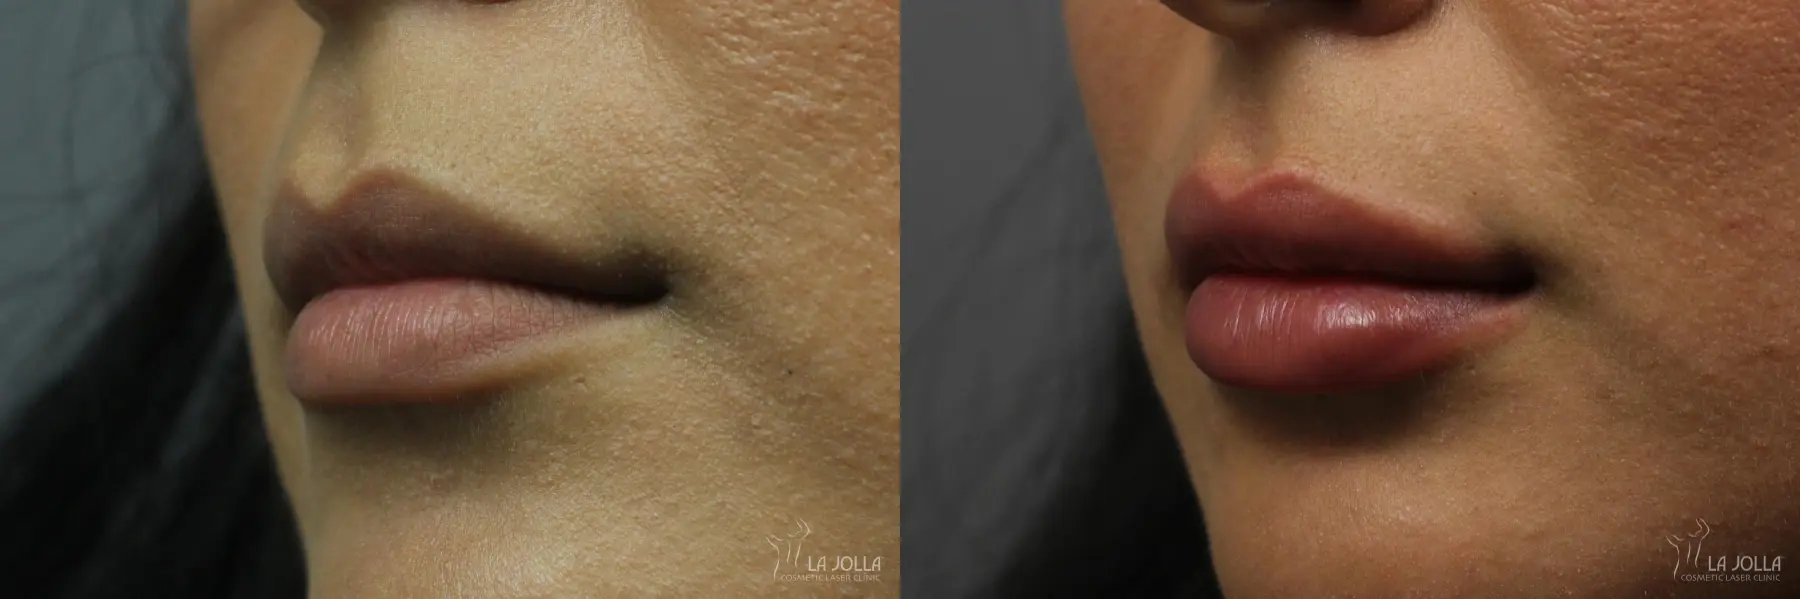 Lip Filler: Patient 1 - Before and After  